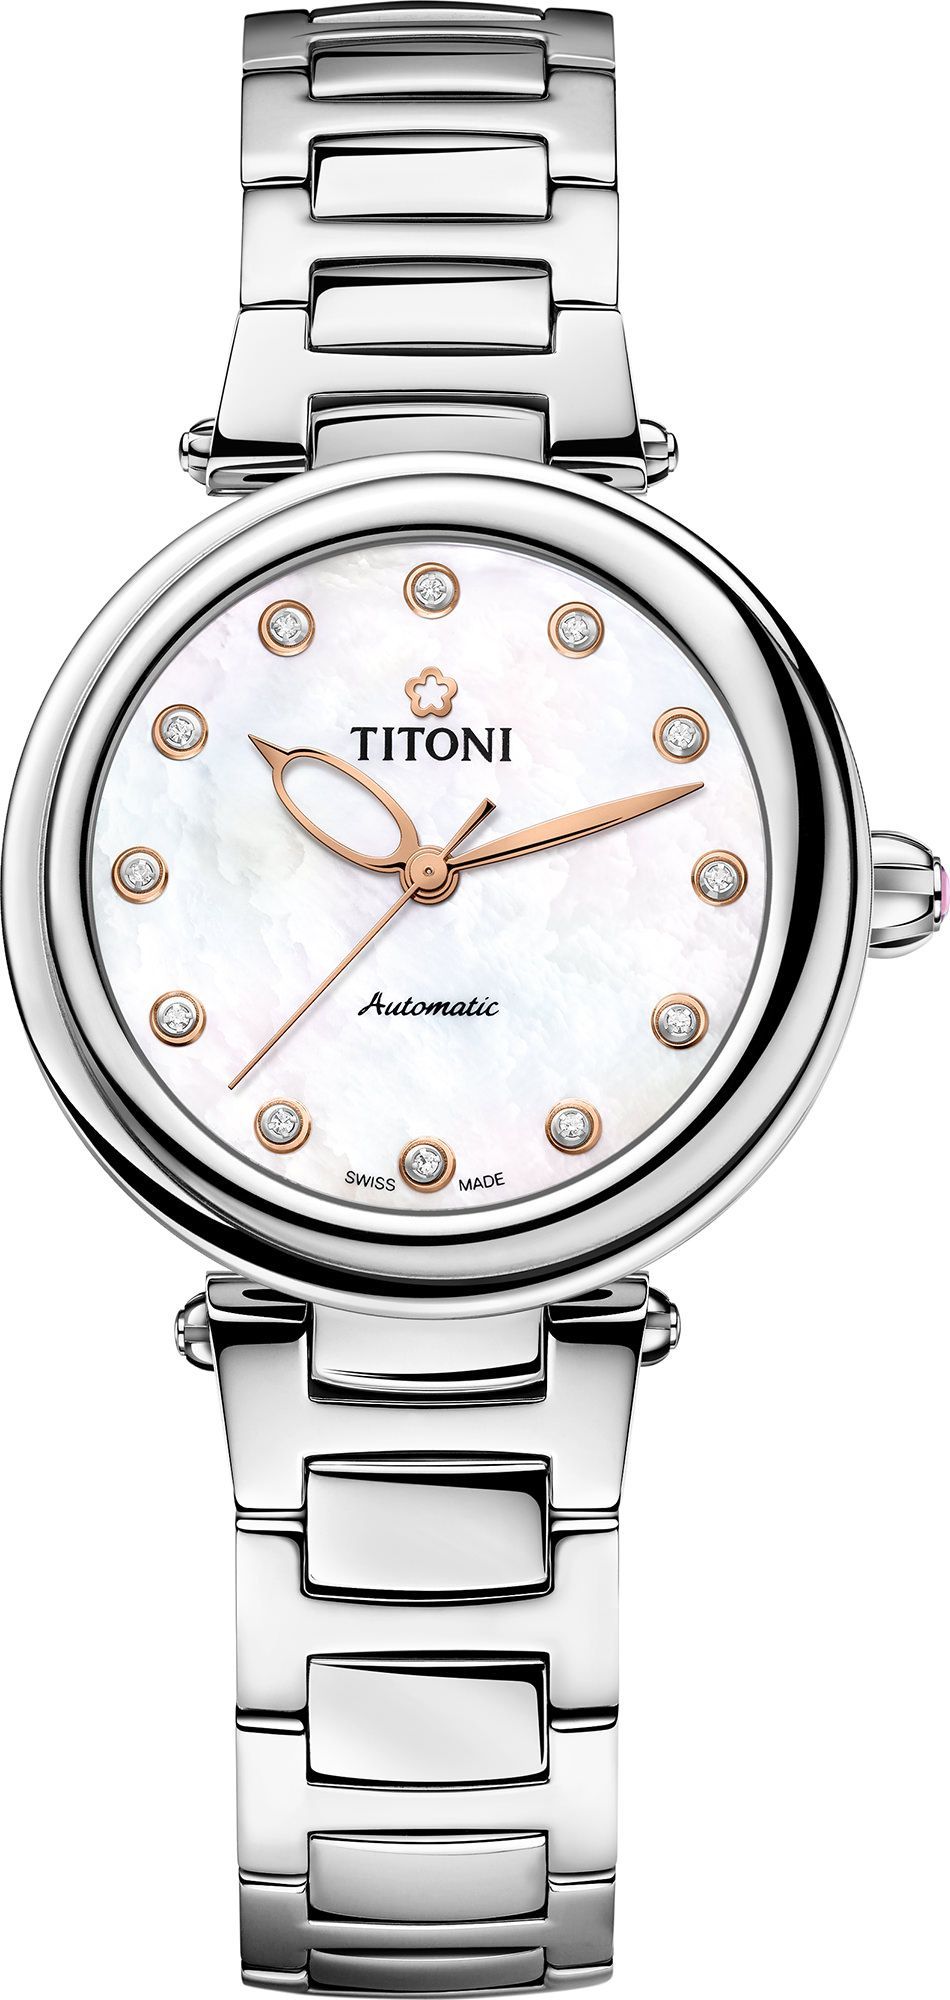 Titoni Miss Lovely  MOP Dial 33.5 mm Automatic Watch For Women - 1